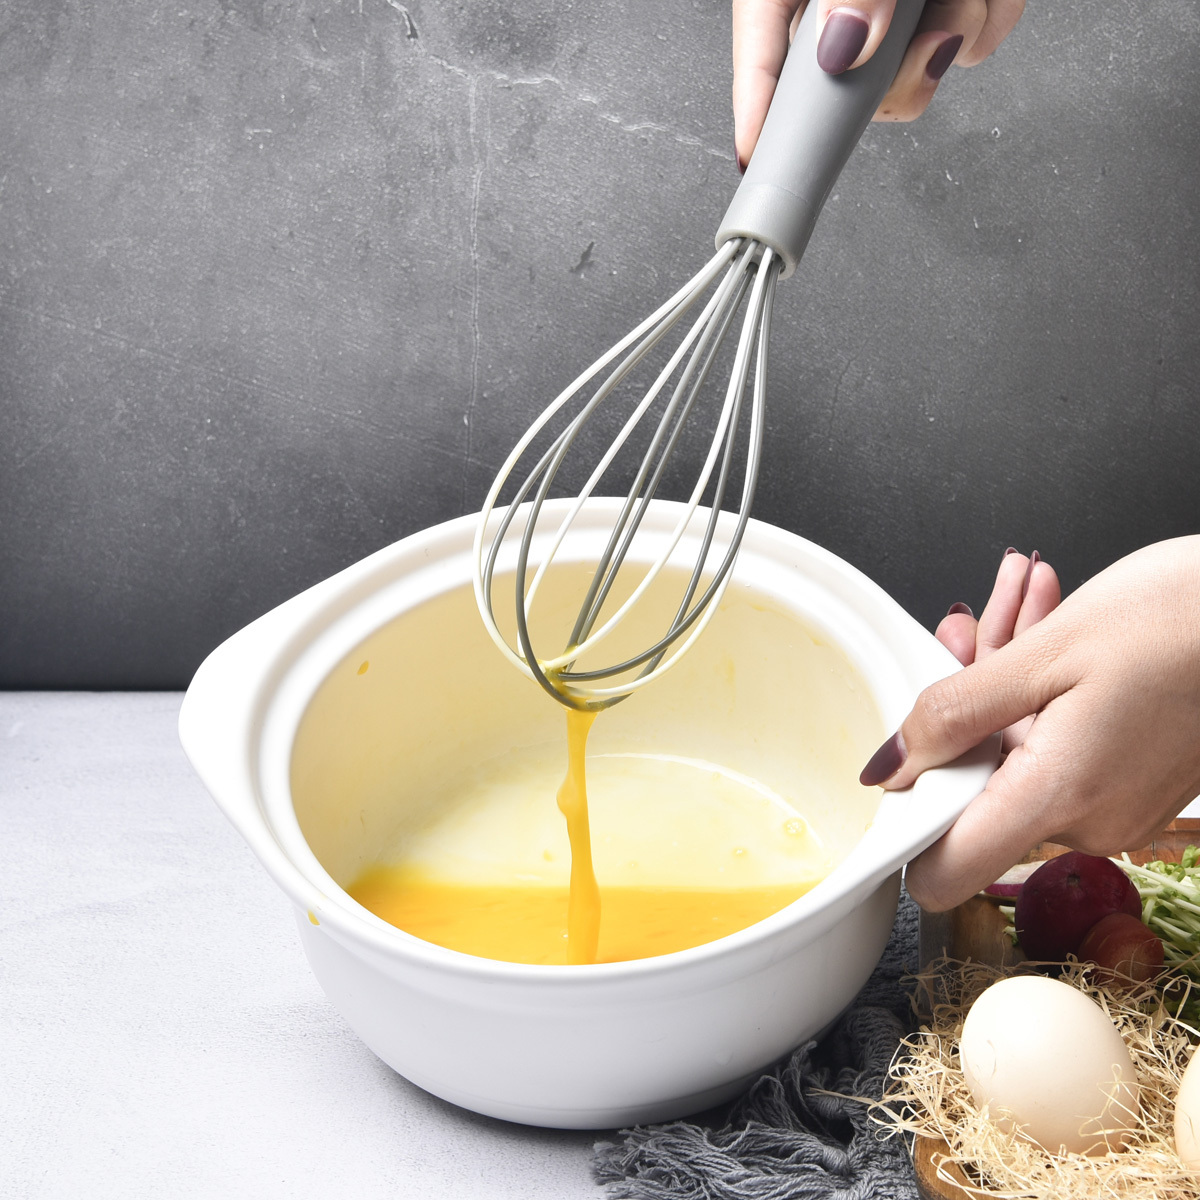 Plastic whisk (eggbeater stock photo. Image of cook, tool - 61790216